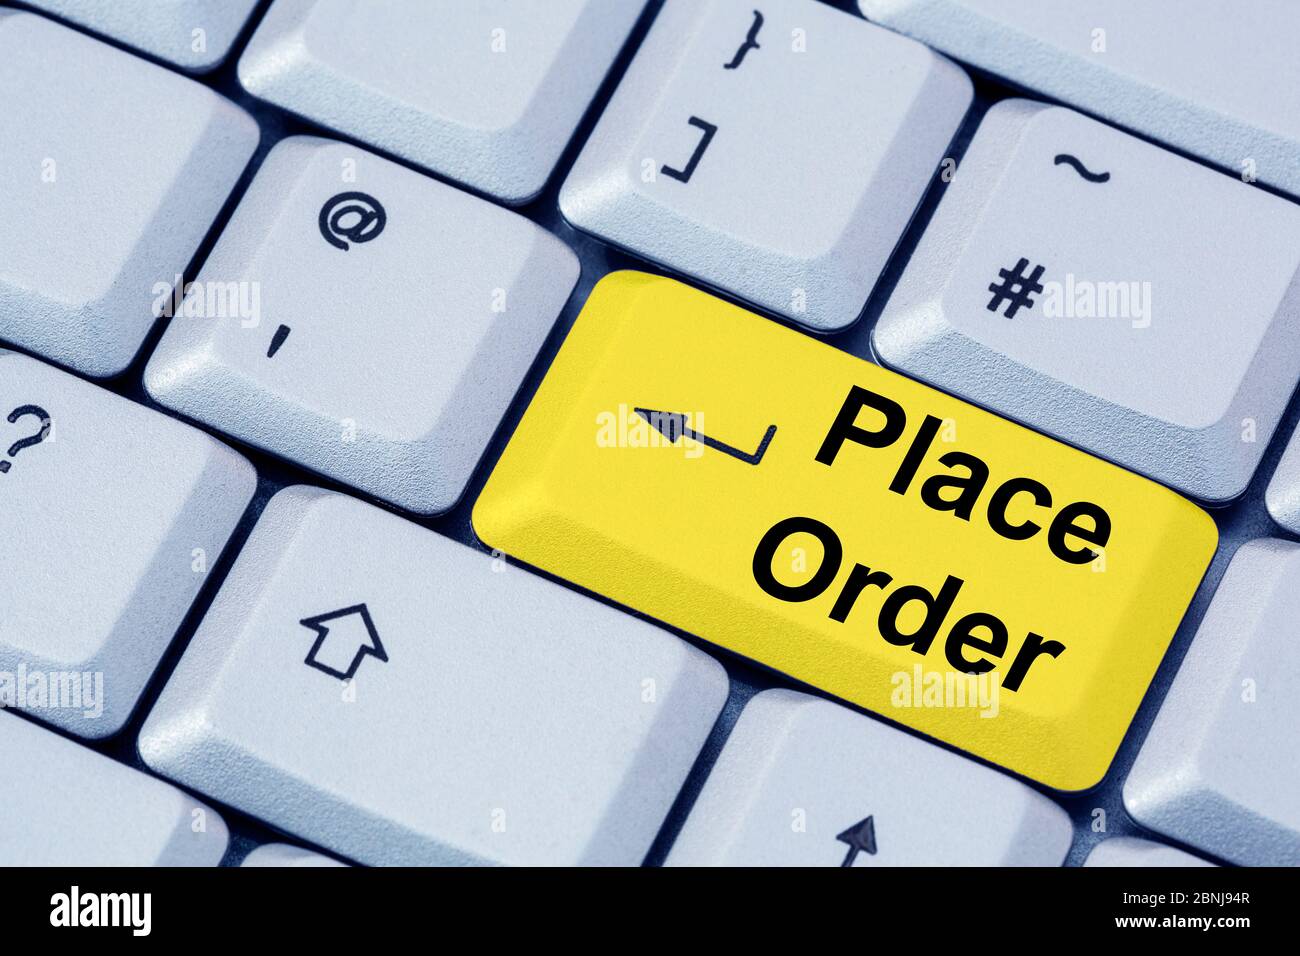 A computer keyboard with words PLACE ORDER on a yellow enter key.  Online shopping concept. Stock Photo